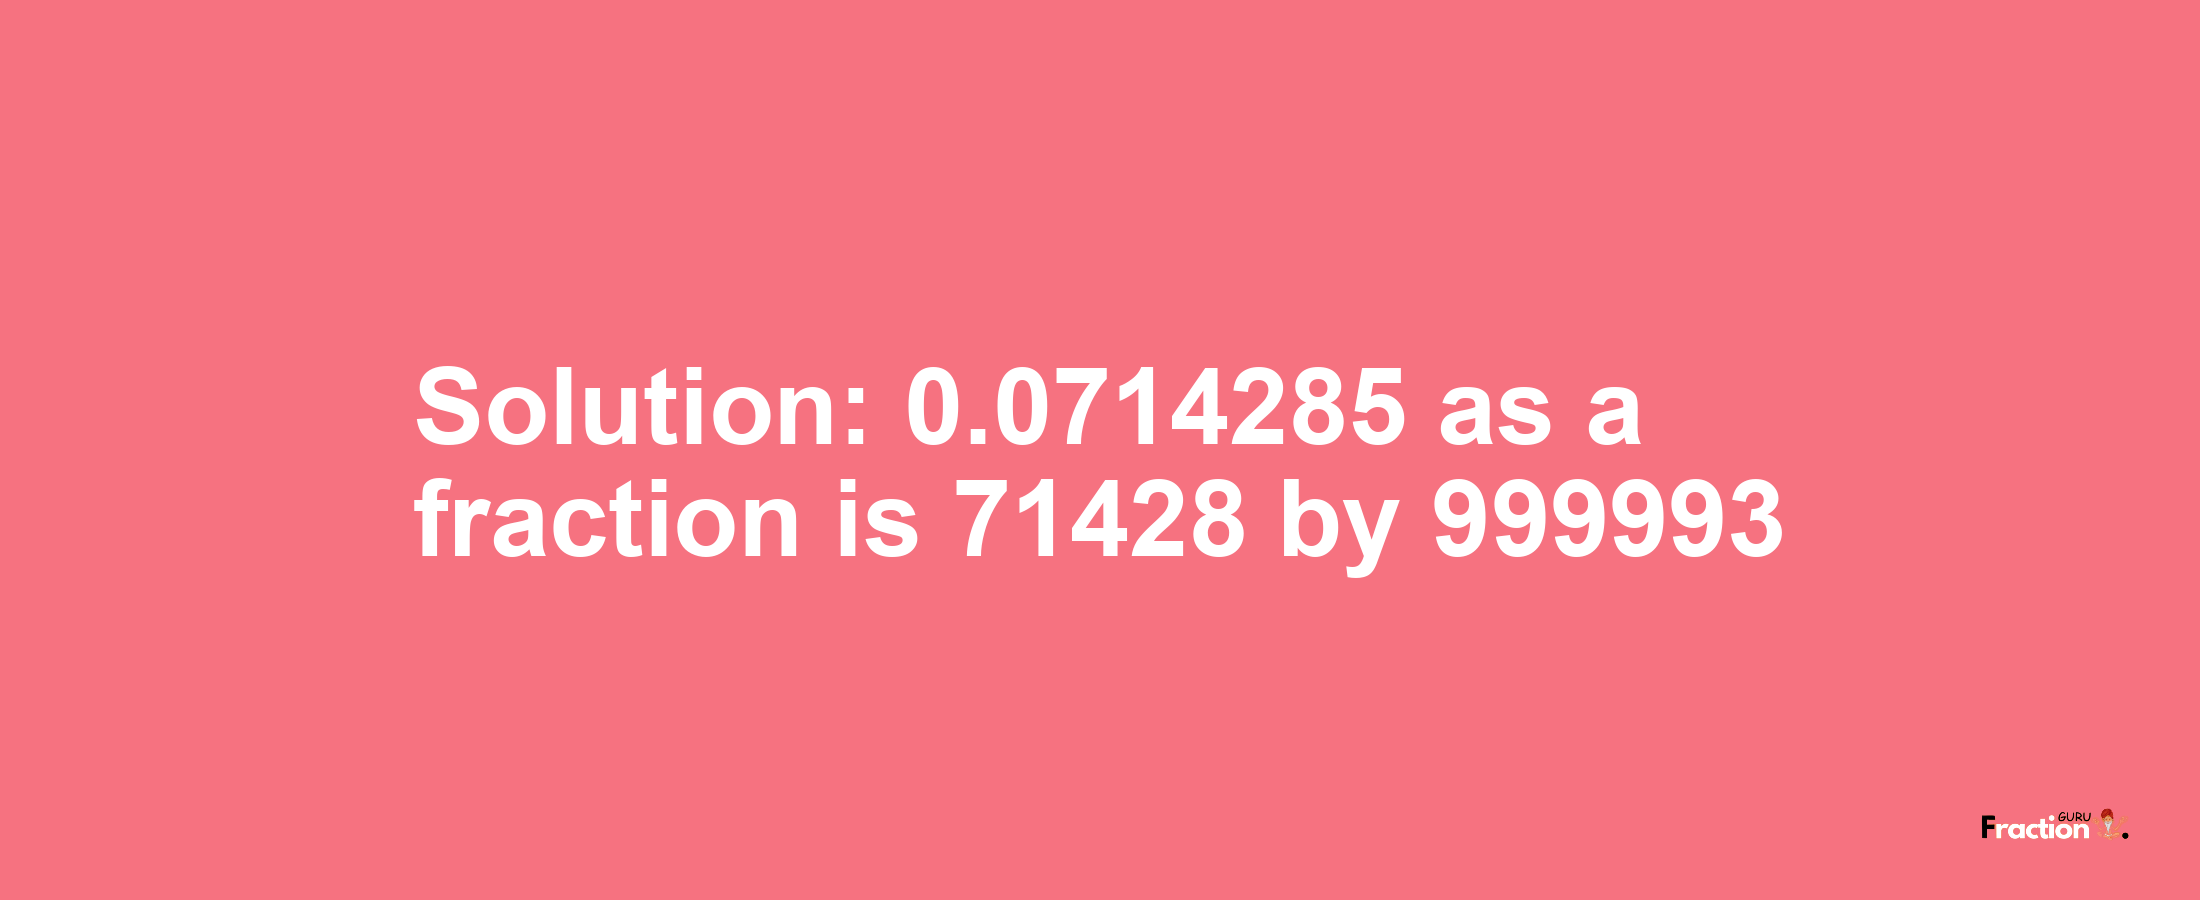 Solution:0.0714285 as a fraction is 71428/999993